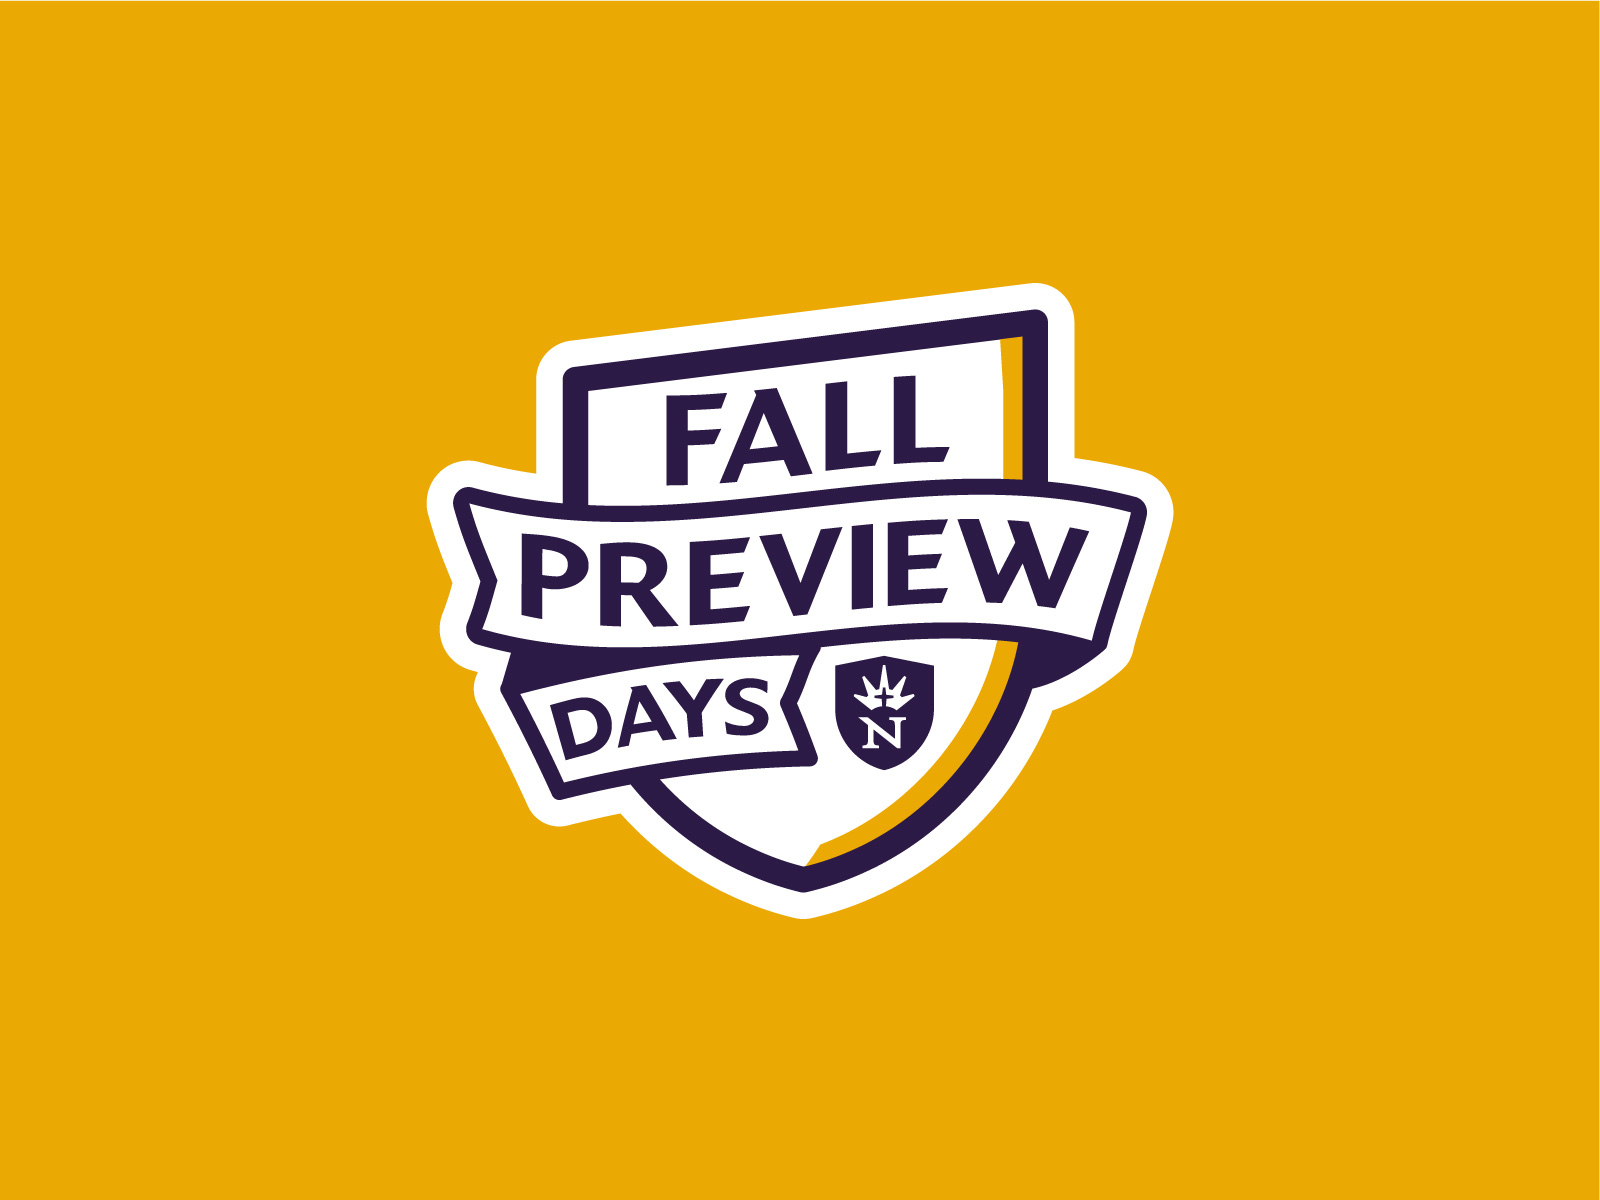 Fall Preview Days Logo by Kevin Wong on Dribbble